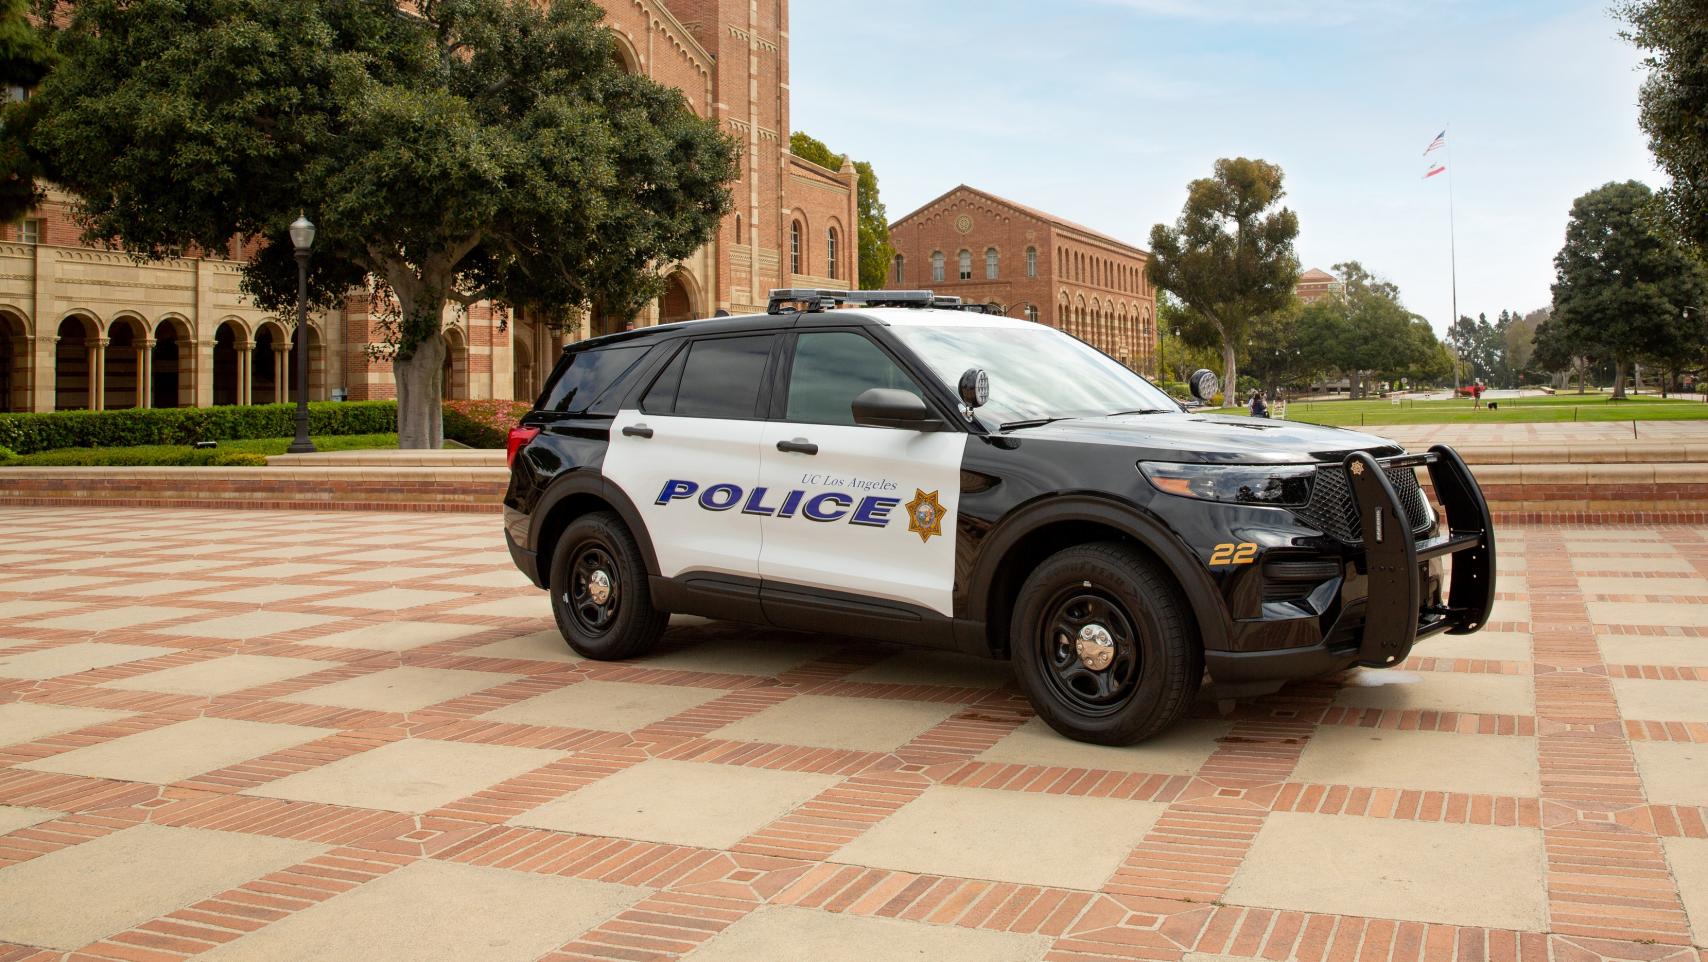 UCPD police car in front of Royce Hall